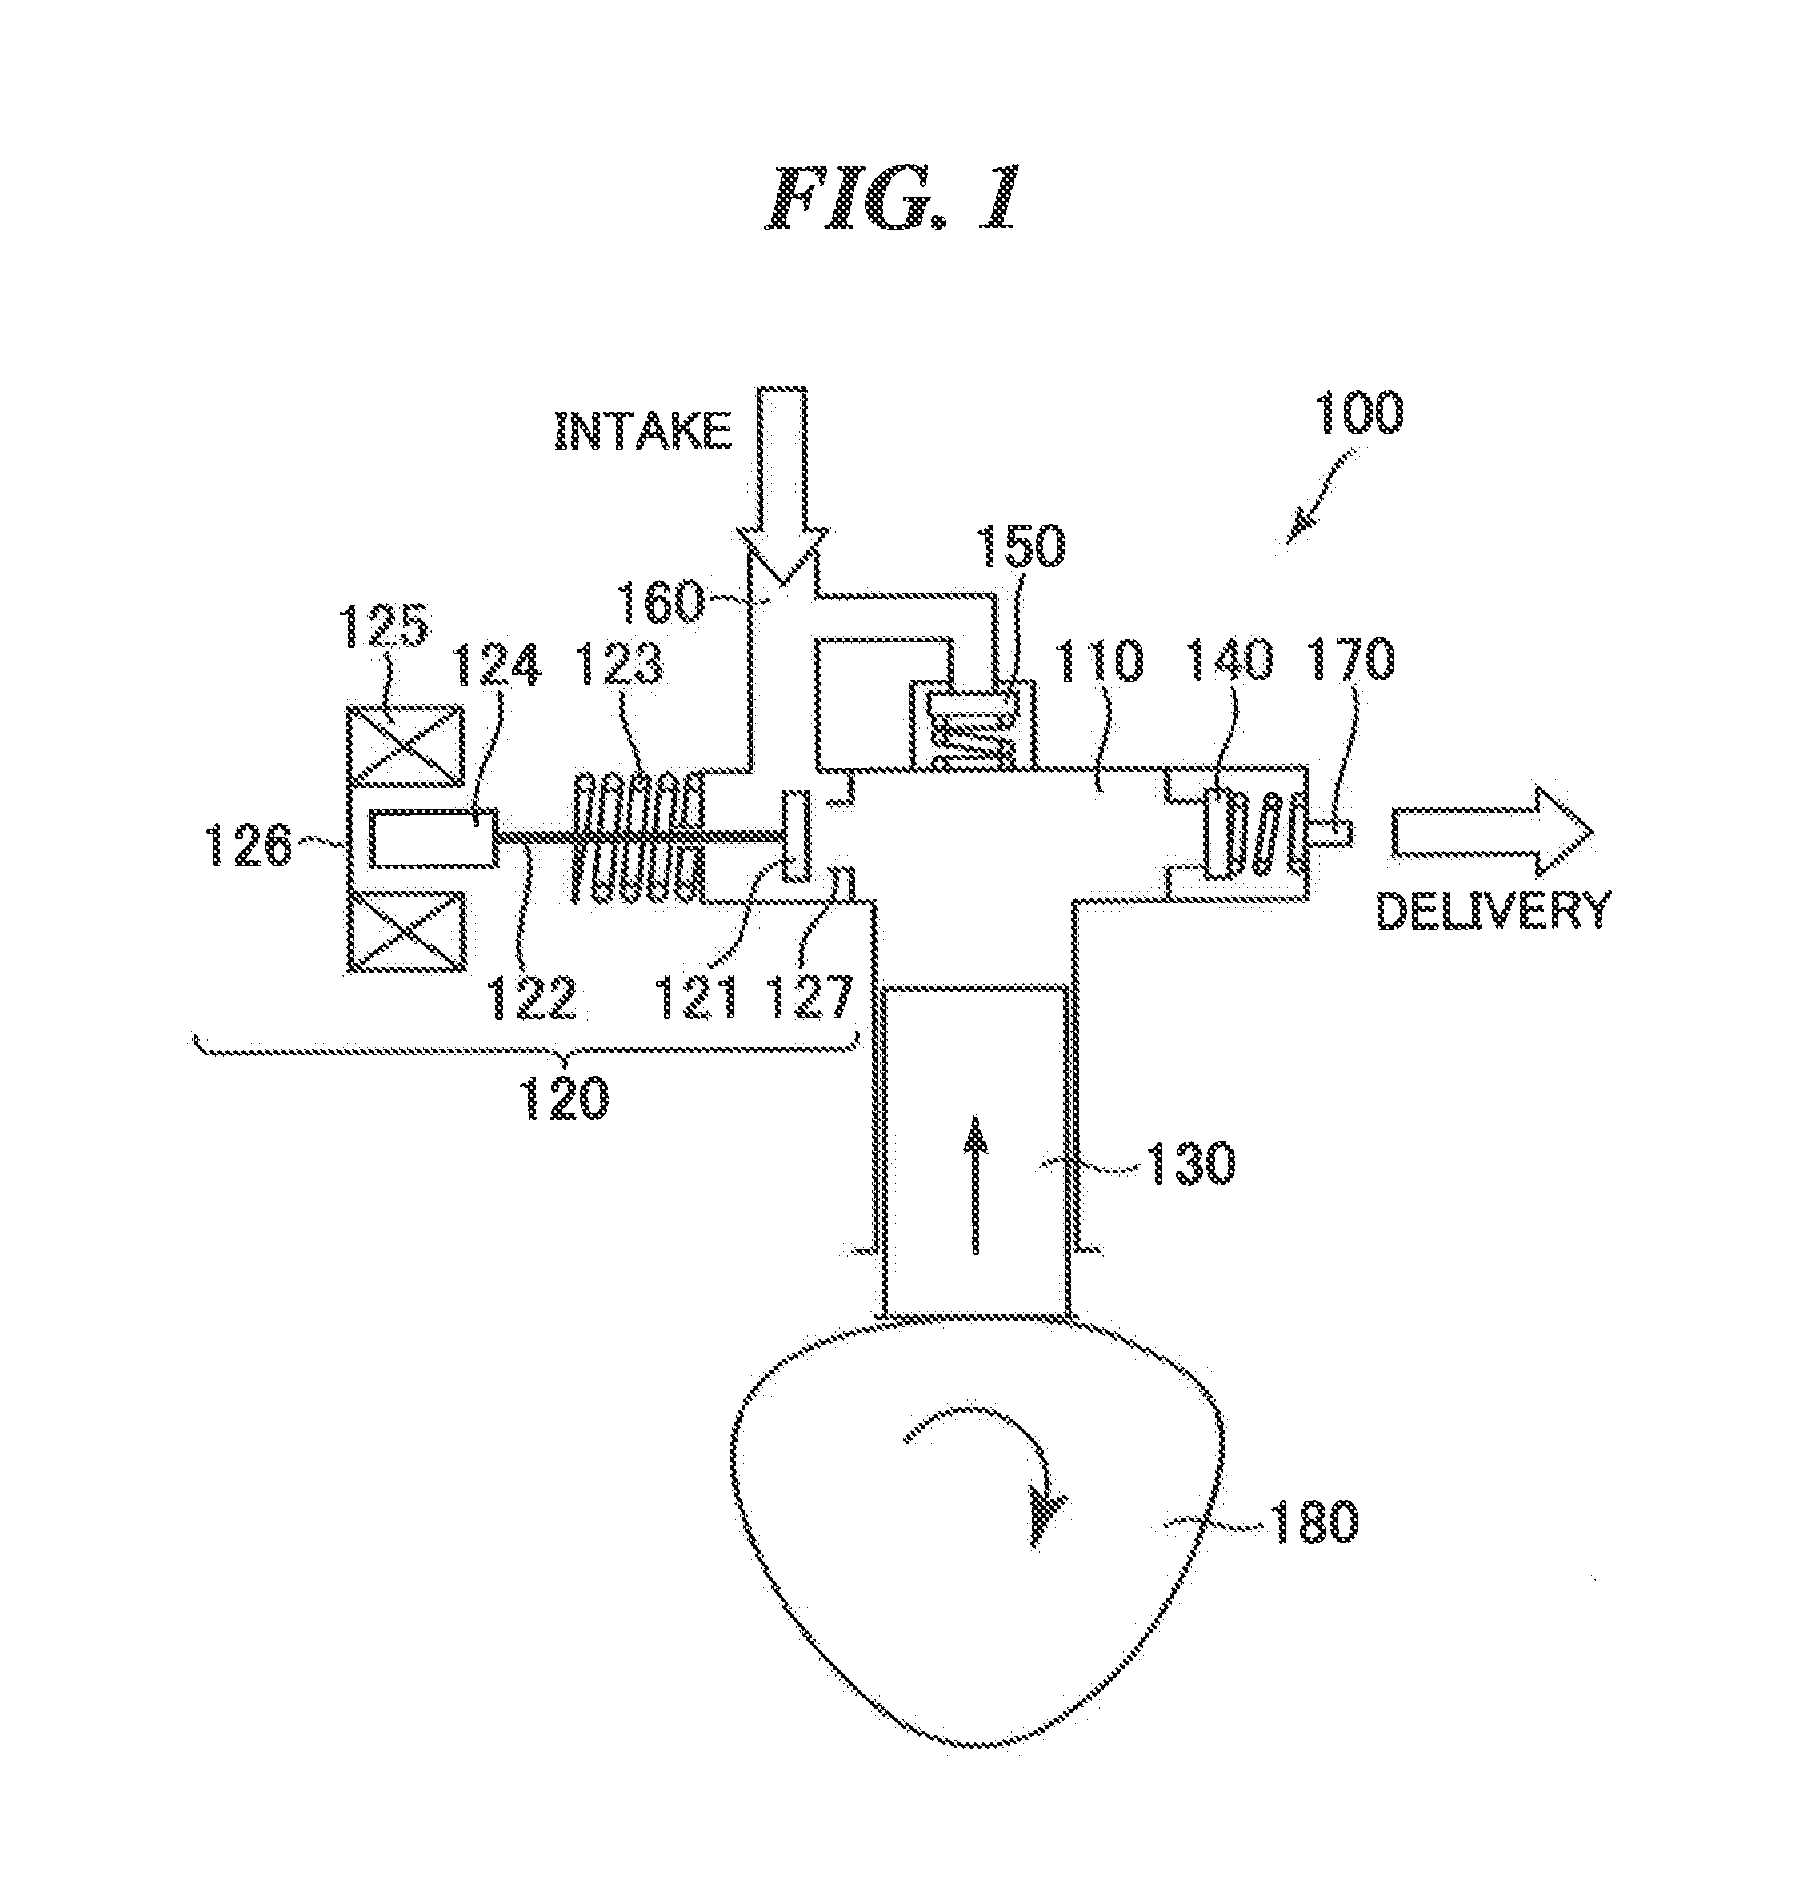 Method and Control Apparatus for Controlling a High-Pressure Fuel Supply Pump Configured to Supply Pressurized Fuel to an Internal Combustion Engine